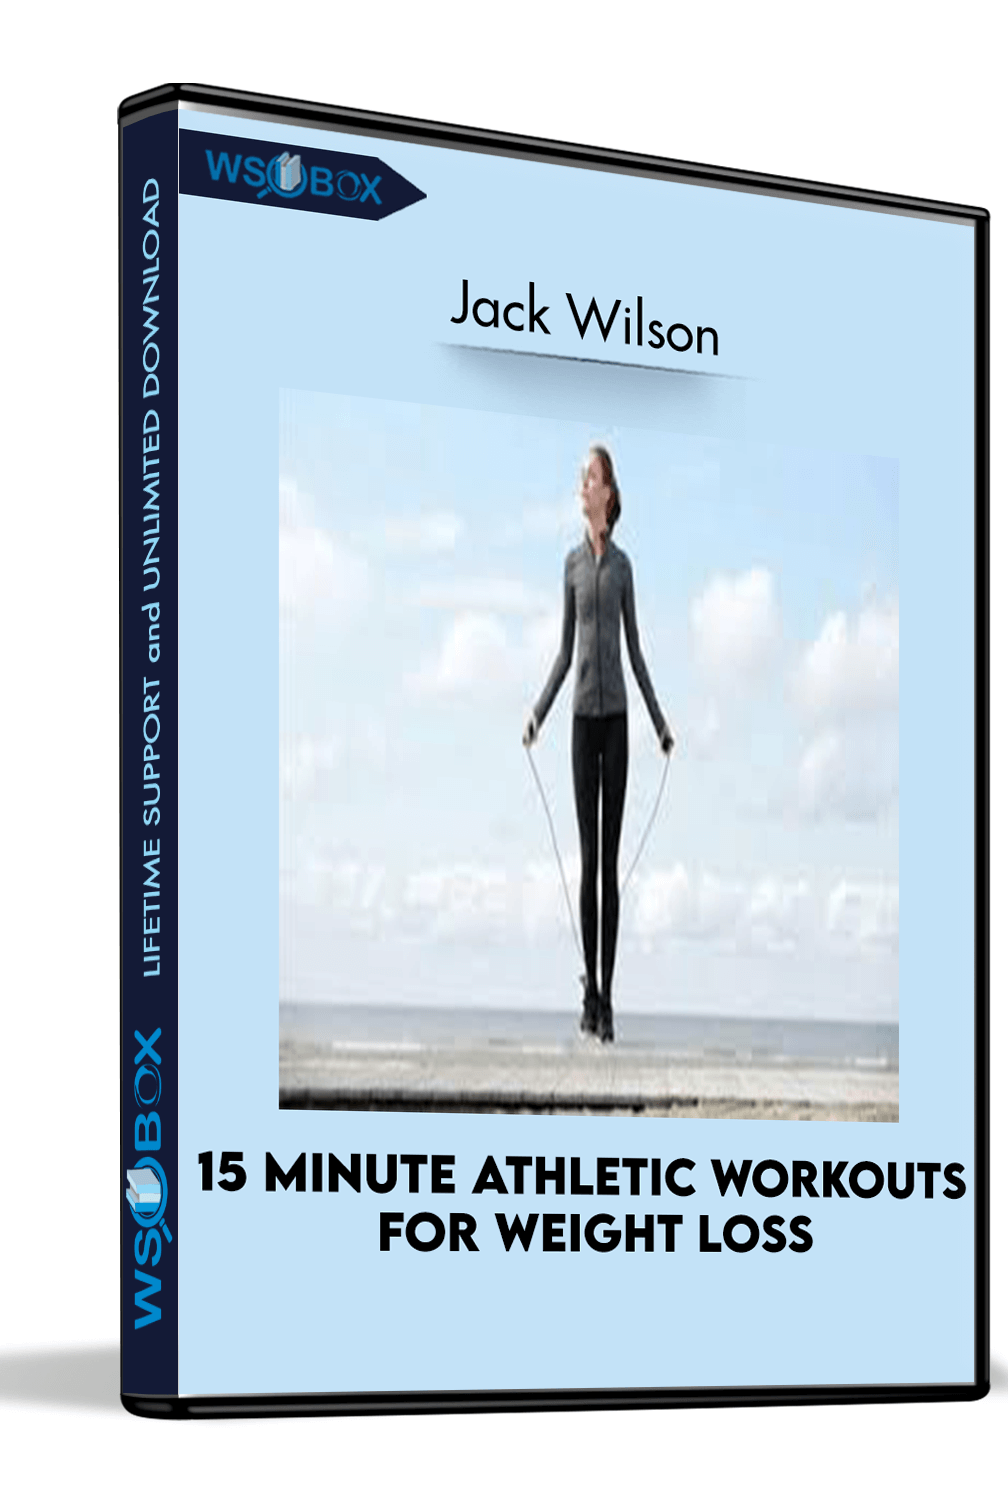 15-minute-athletic-workouts-for-weight-loss-jack-wilson